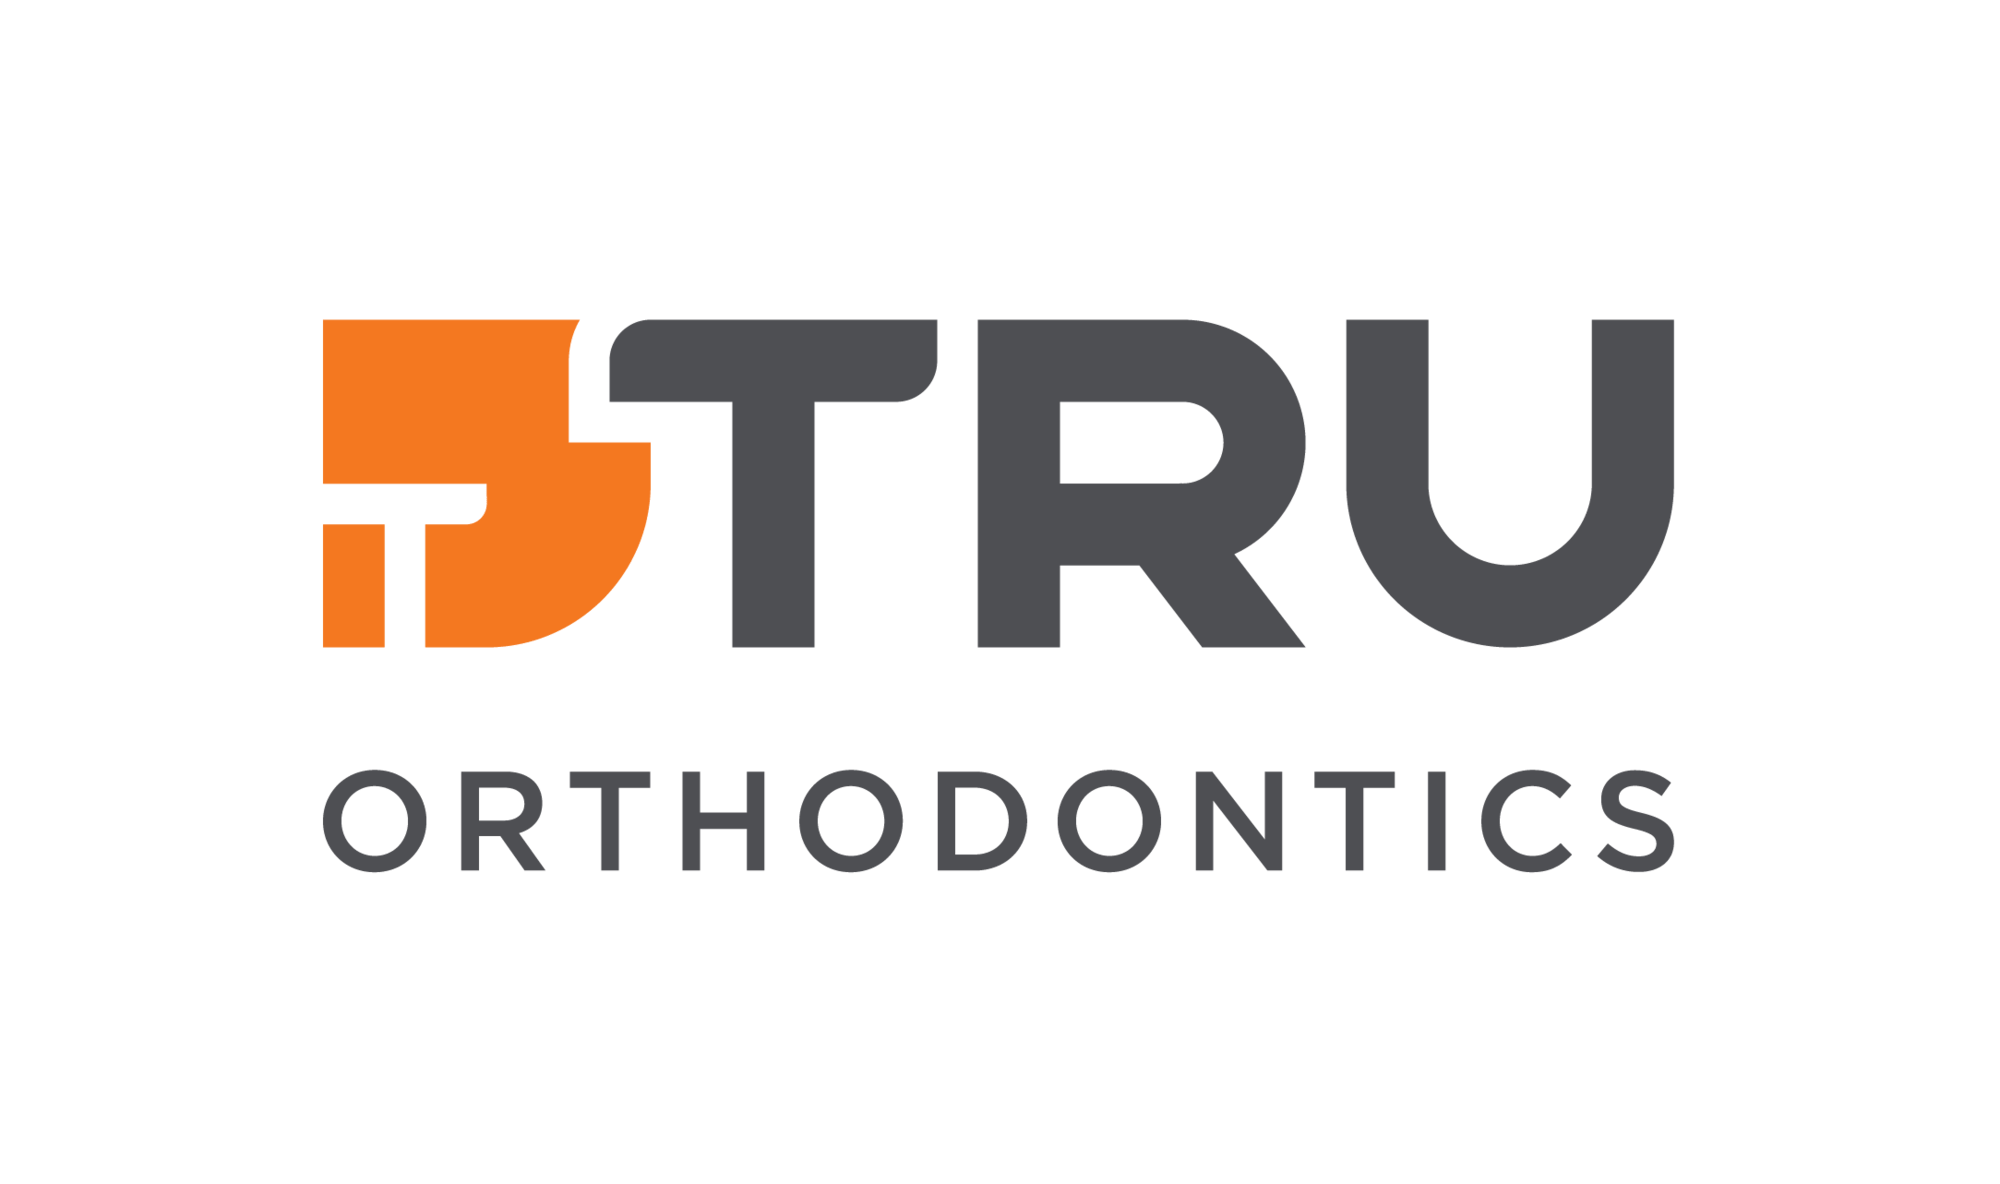 A sharp and modern logo for Tru Orthodontics with simple shapes and colours